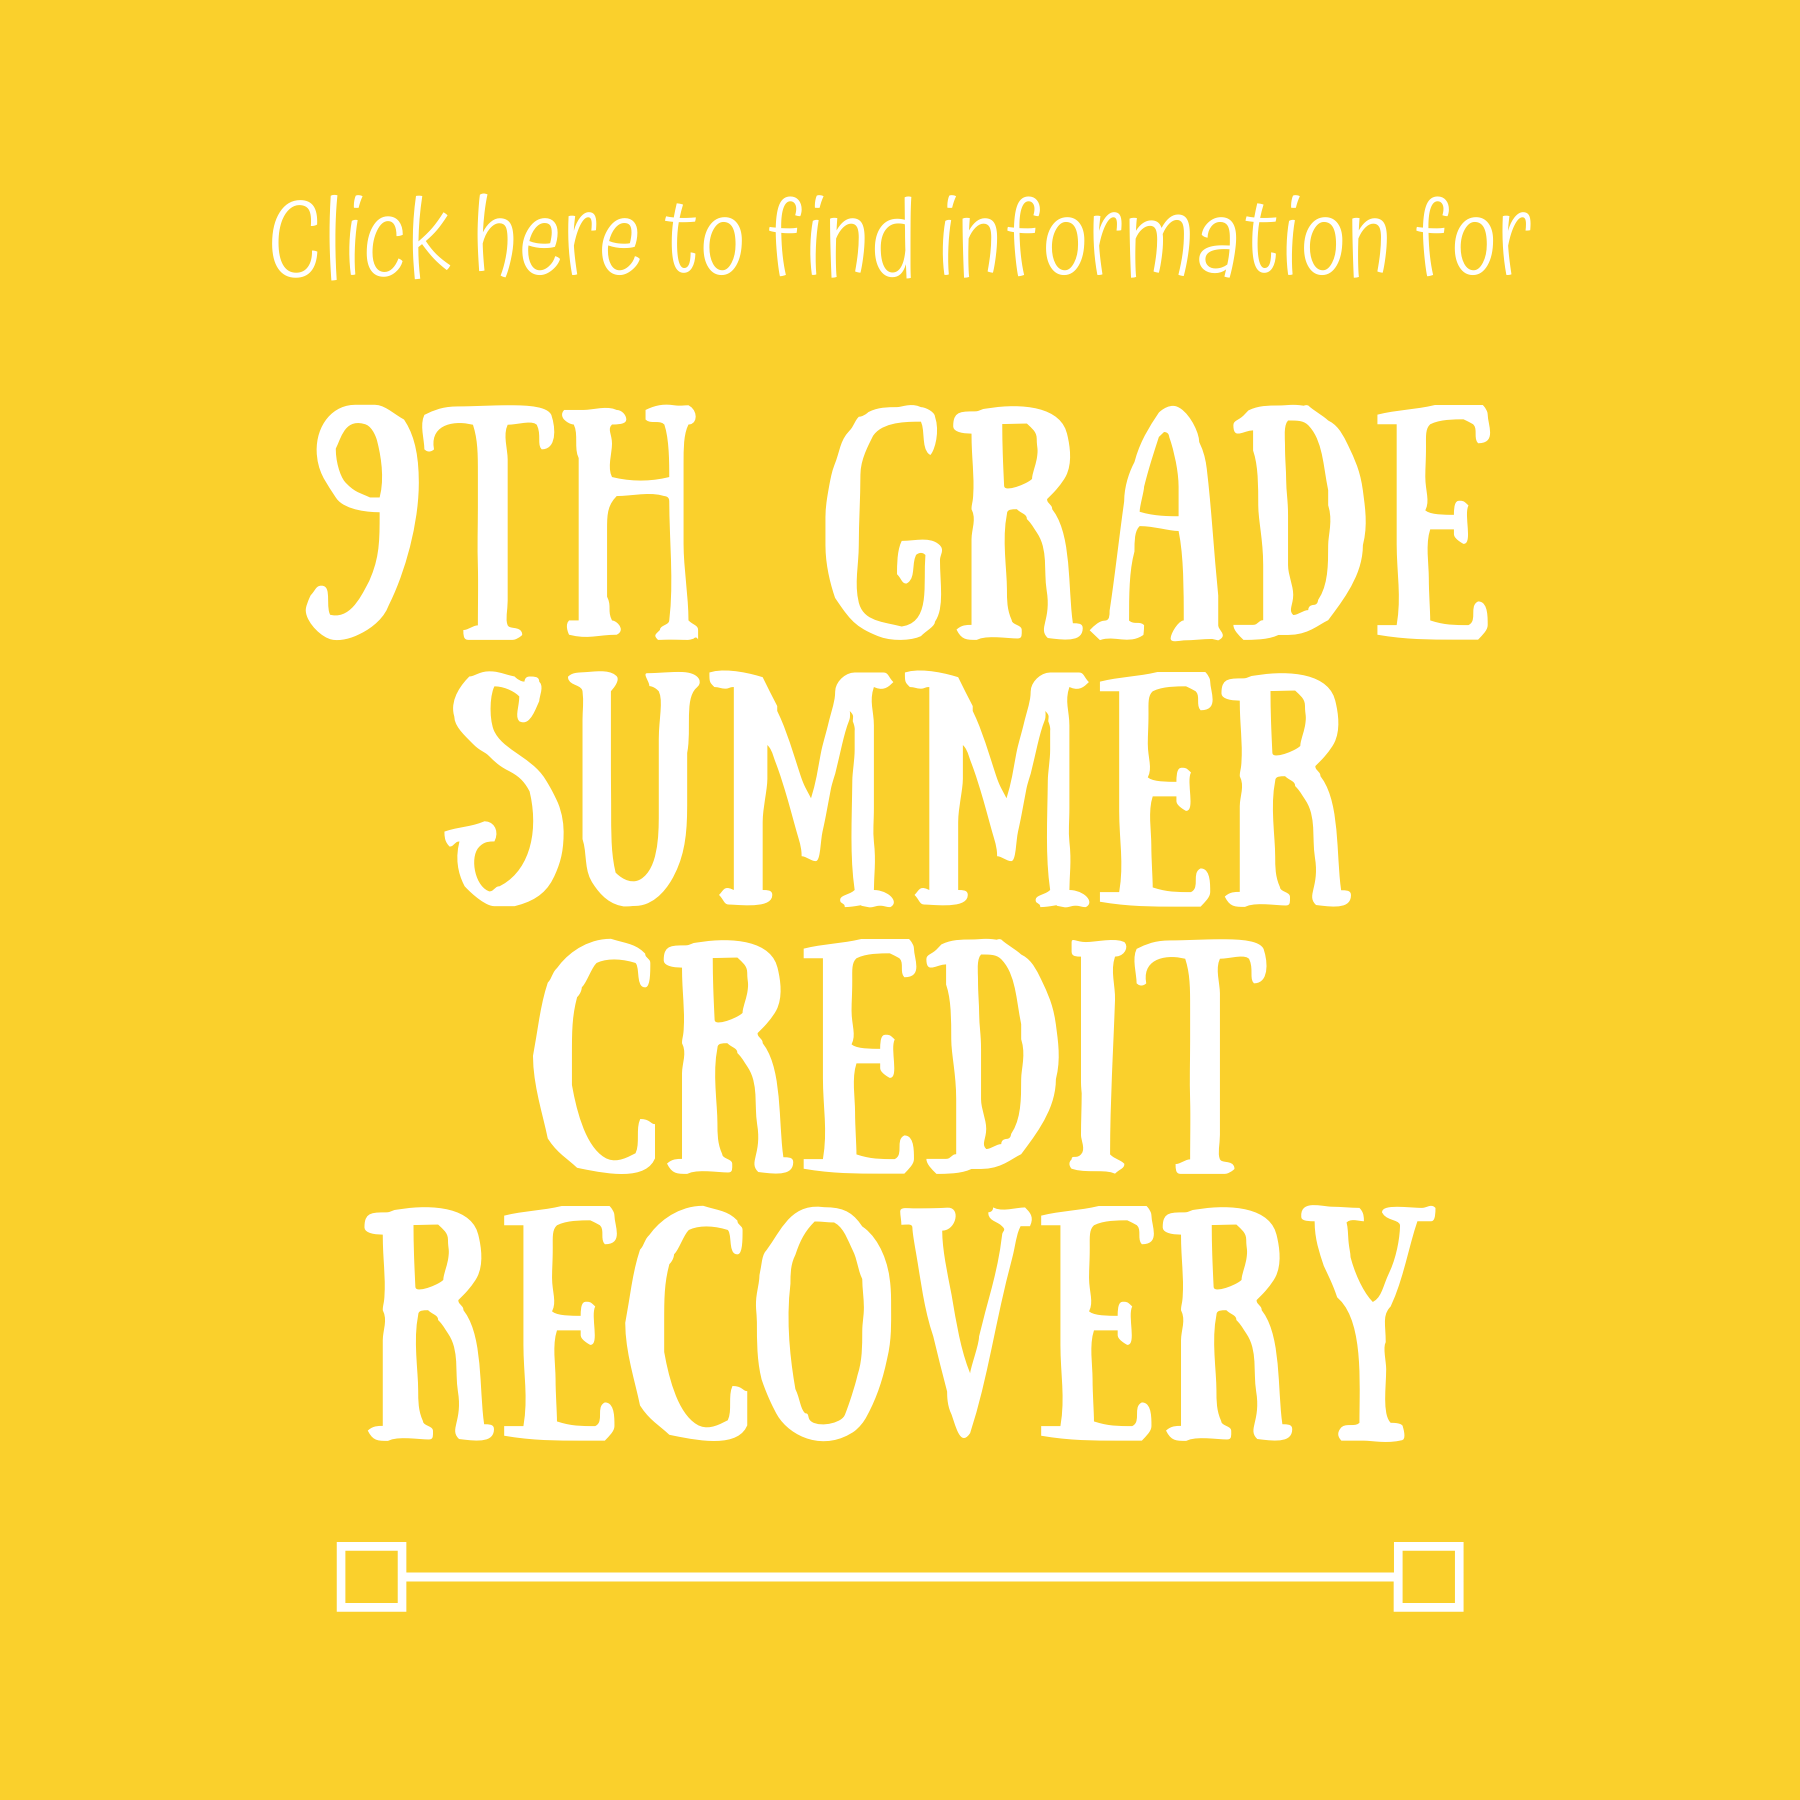 Click here for 9th grade summer credit recovery information.